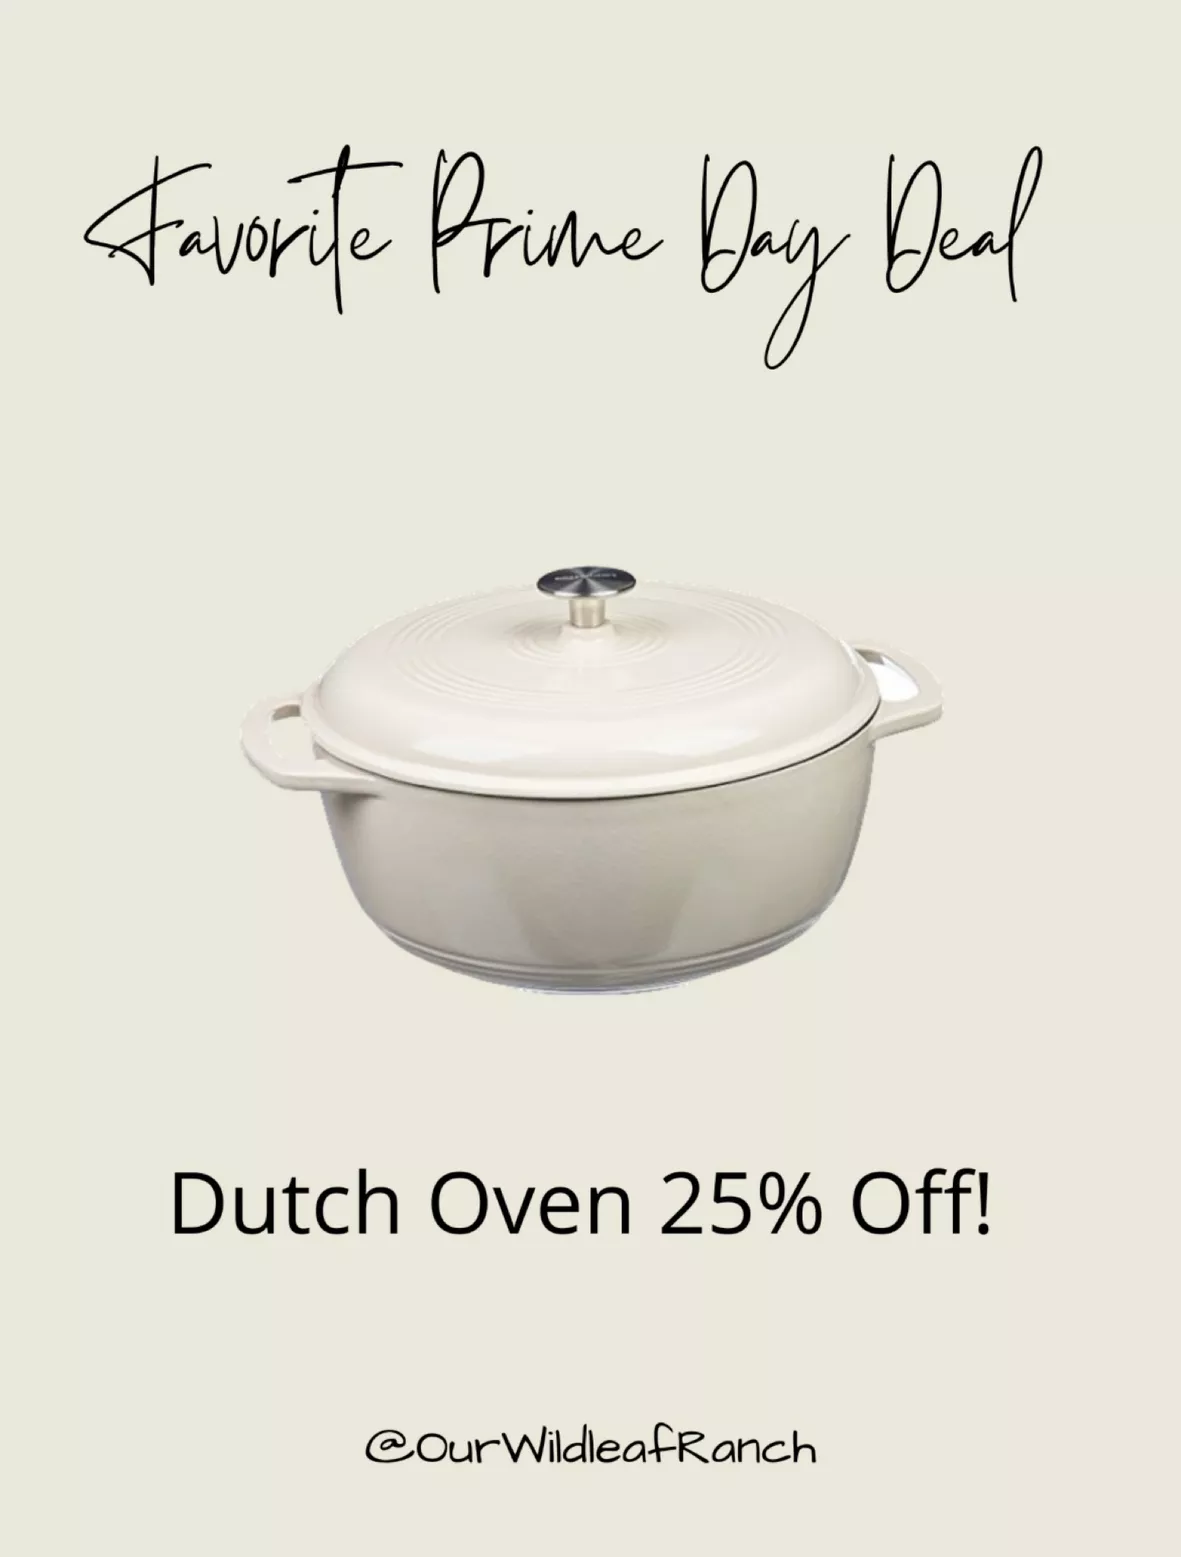 Early Prime Day deal: The top-selling  Basics Dutch oven is $30